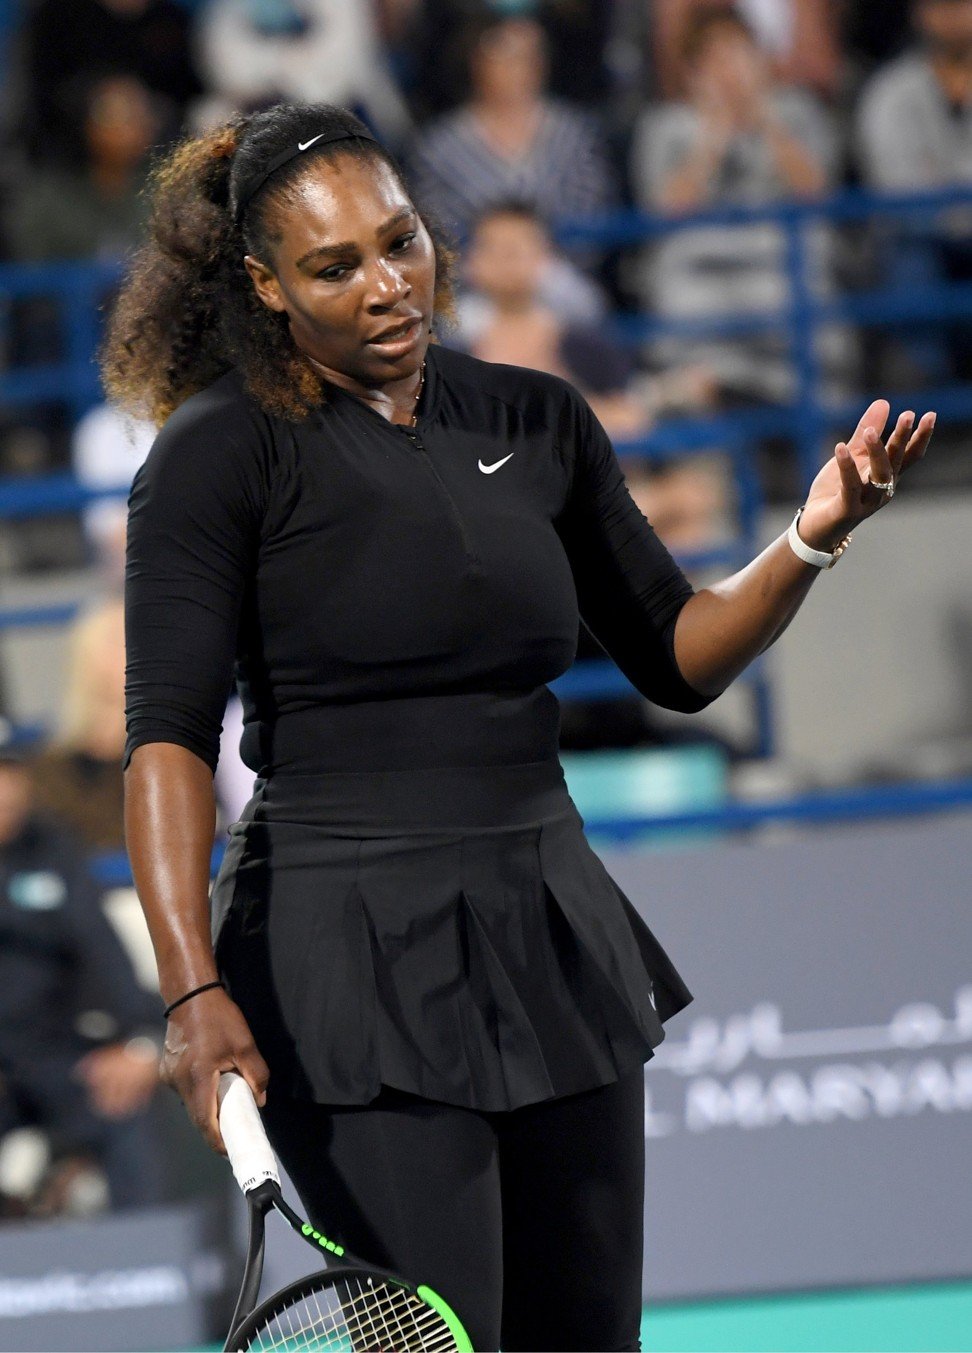 Serena Williams says she was not up to her usual high standards against Jelena Ostapenko. Photo: EPA